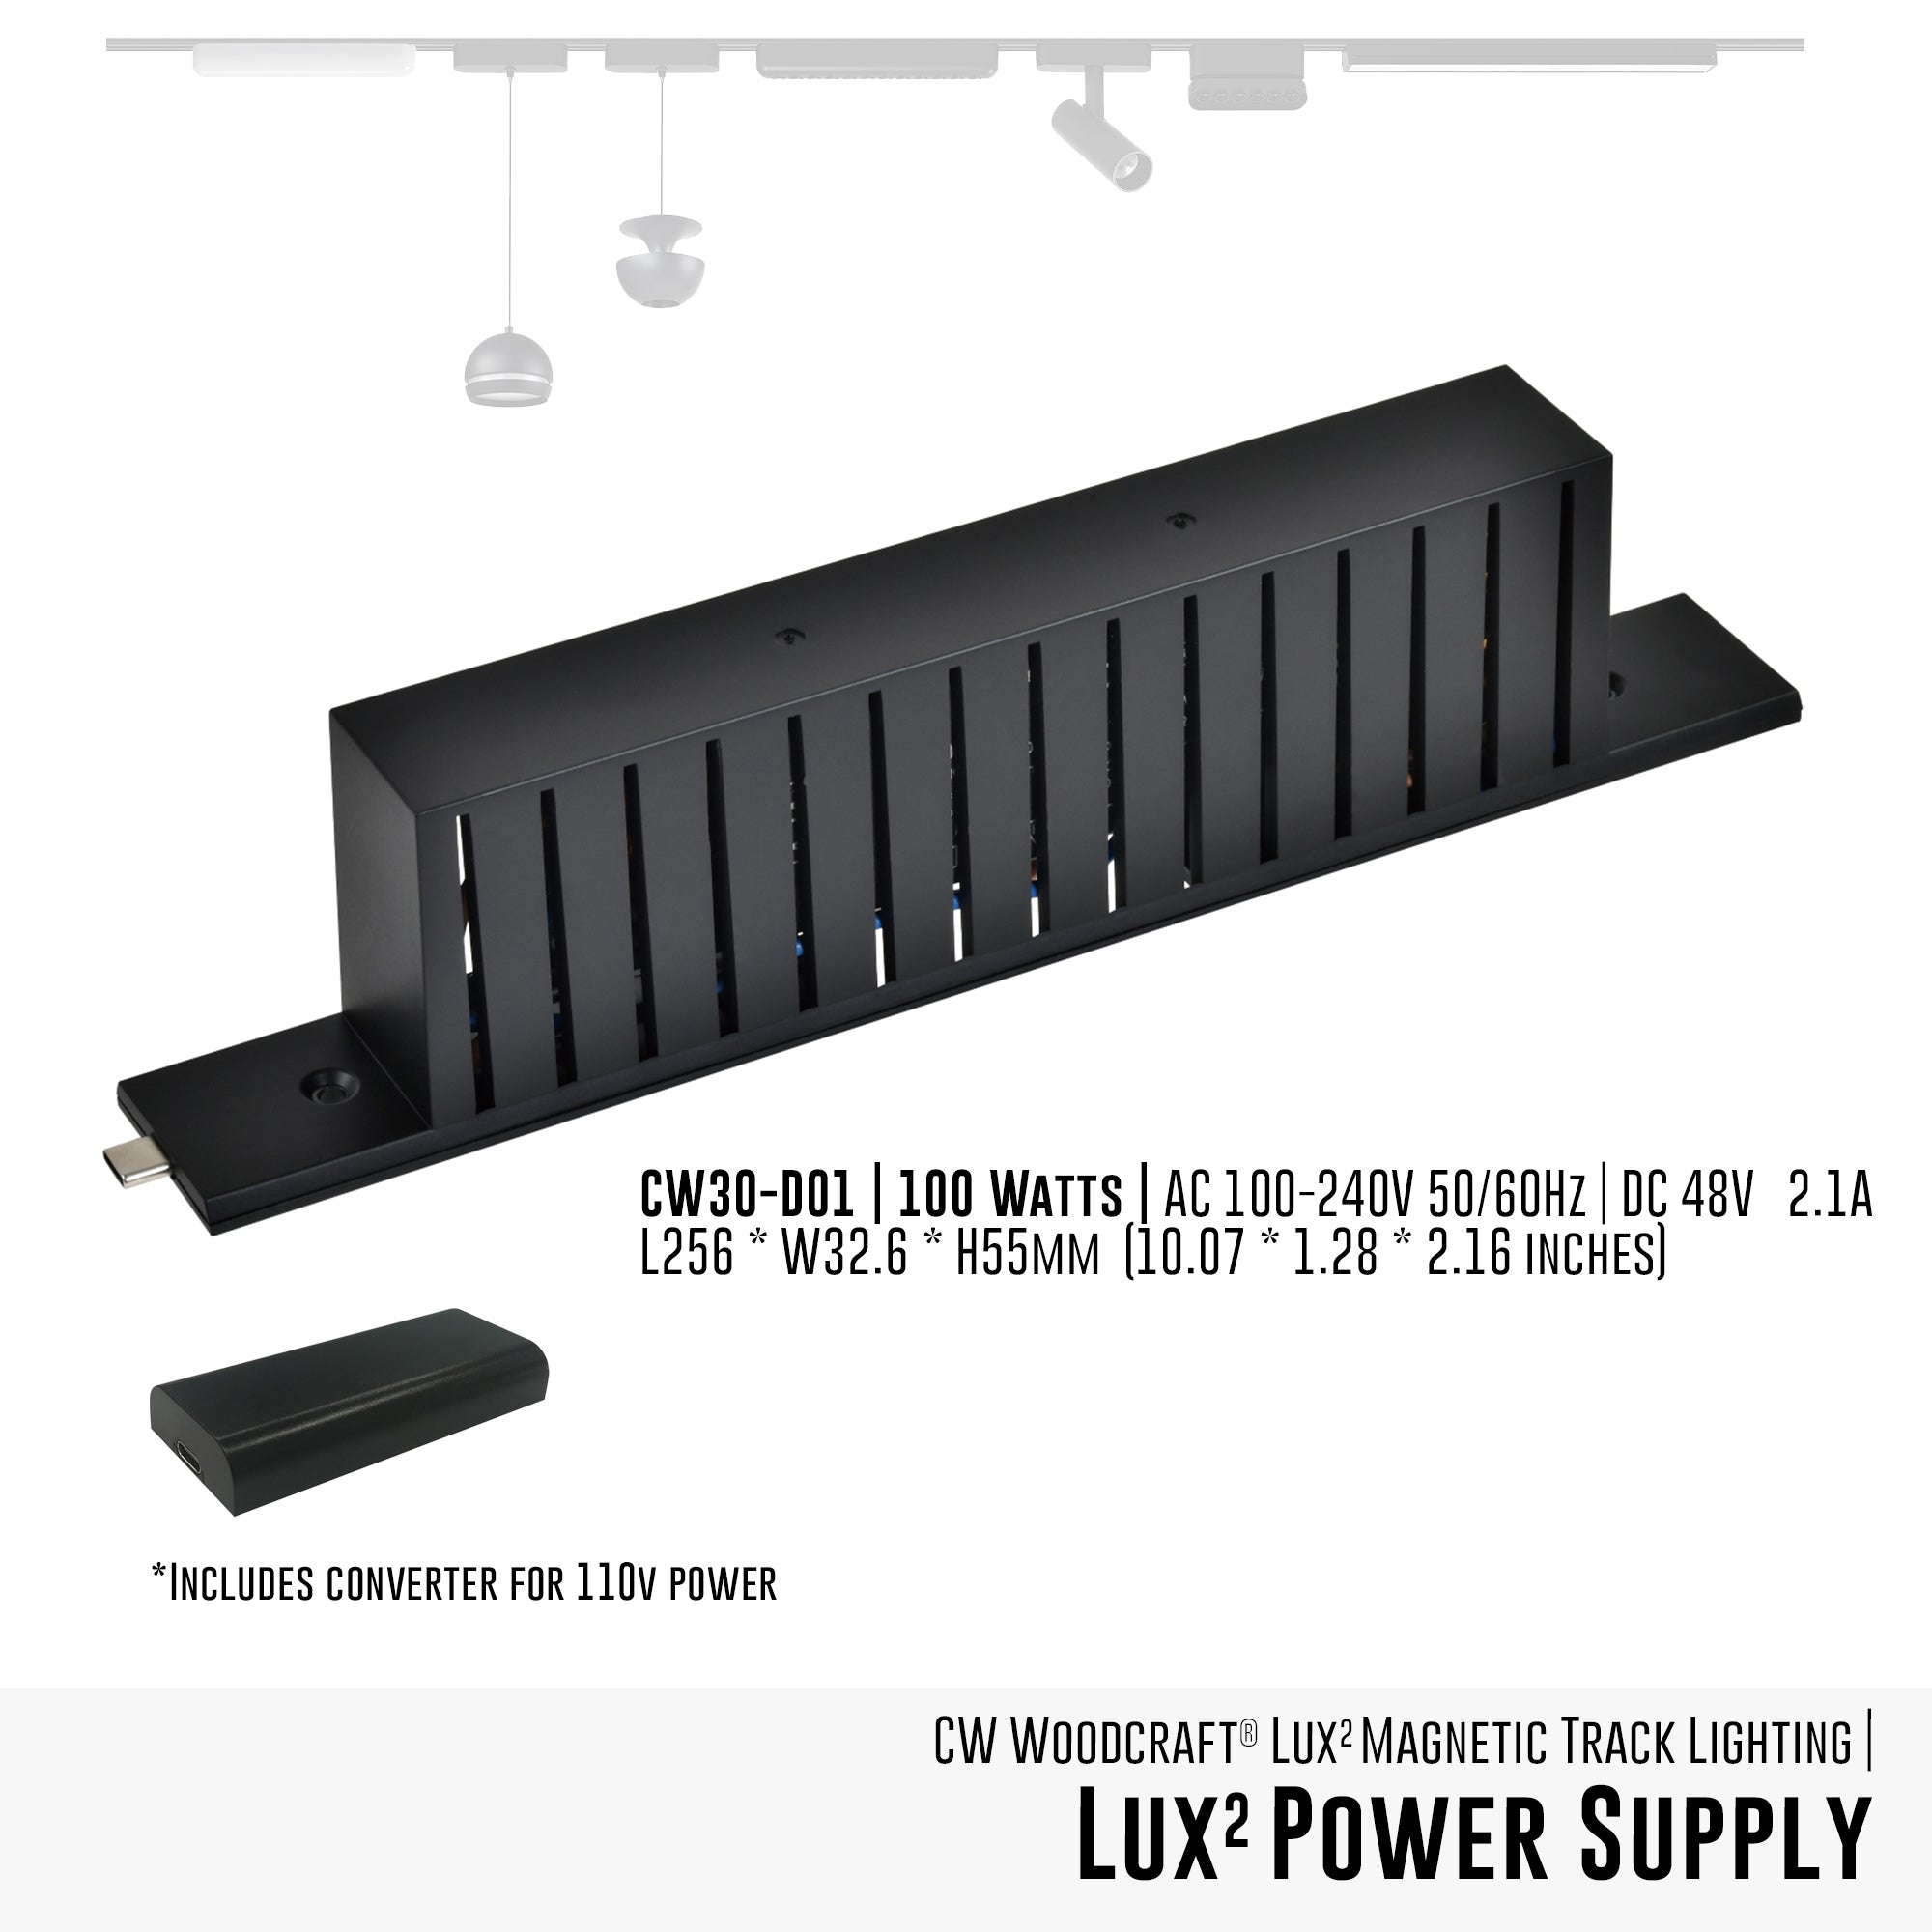 LUX 2 MAGNETIC LIGHTING SYSTEM | Power Source | Bluetooth Enabled